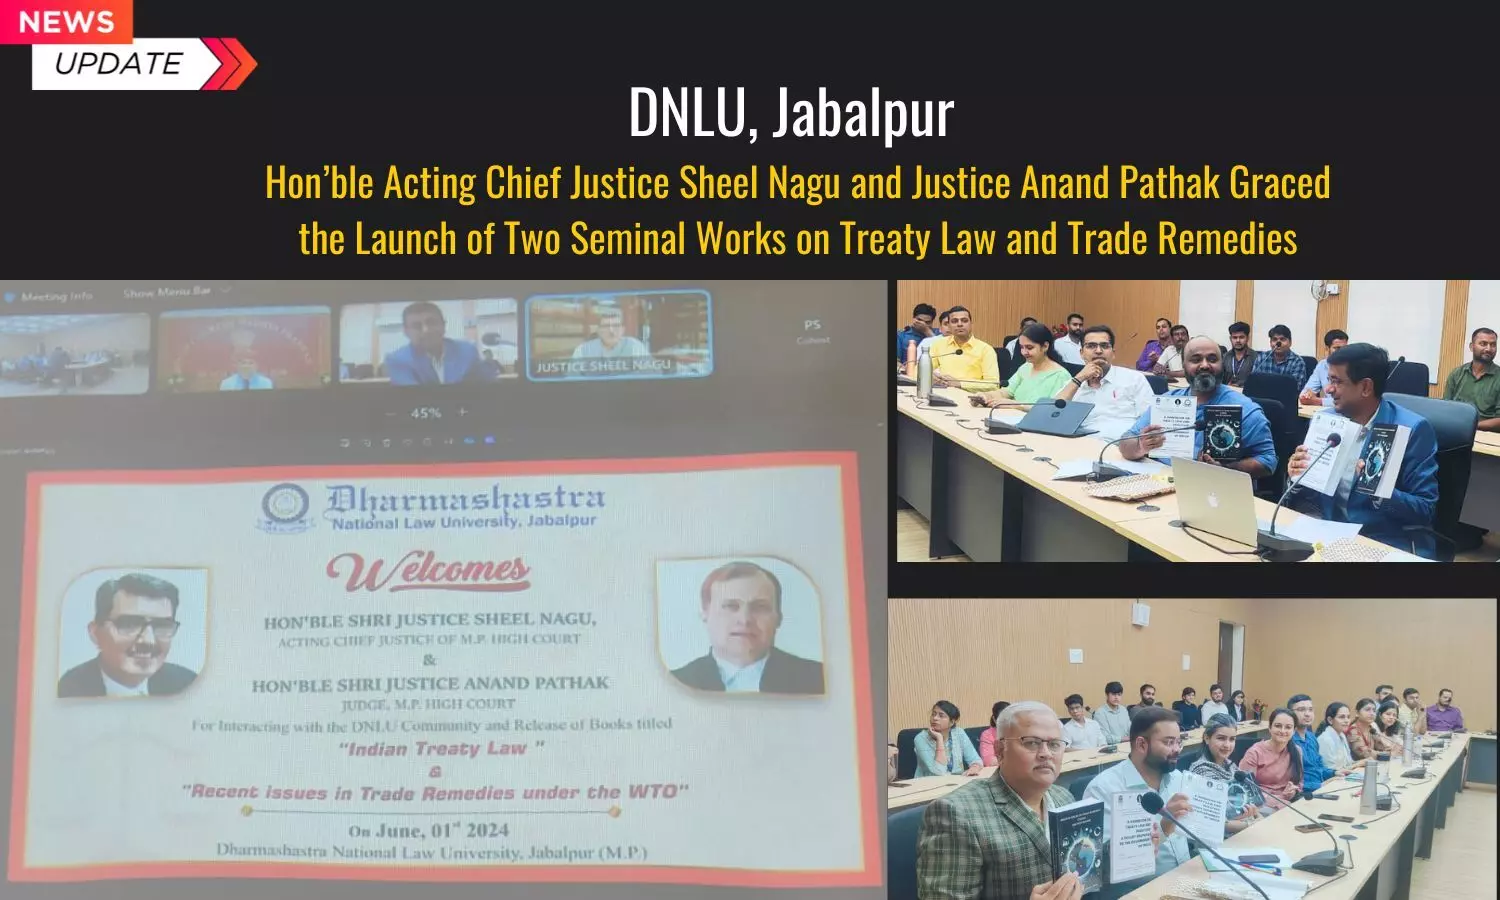 DNLU, Jabalpur | Hon’ble Acting Chief Justice Sheel Nagu and Justice Anand Pathak Graced the Launch of Two Seminal Works on Treaty Law and Trade Remedies